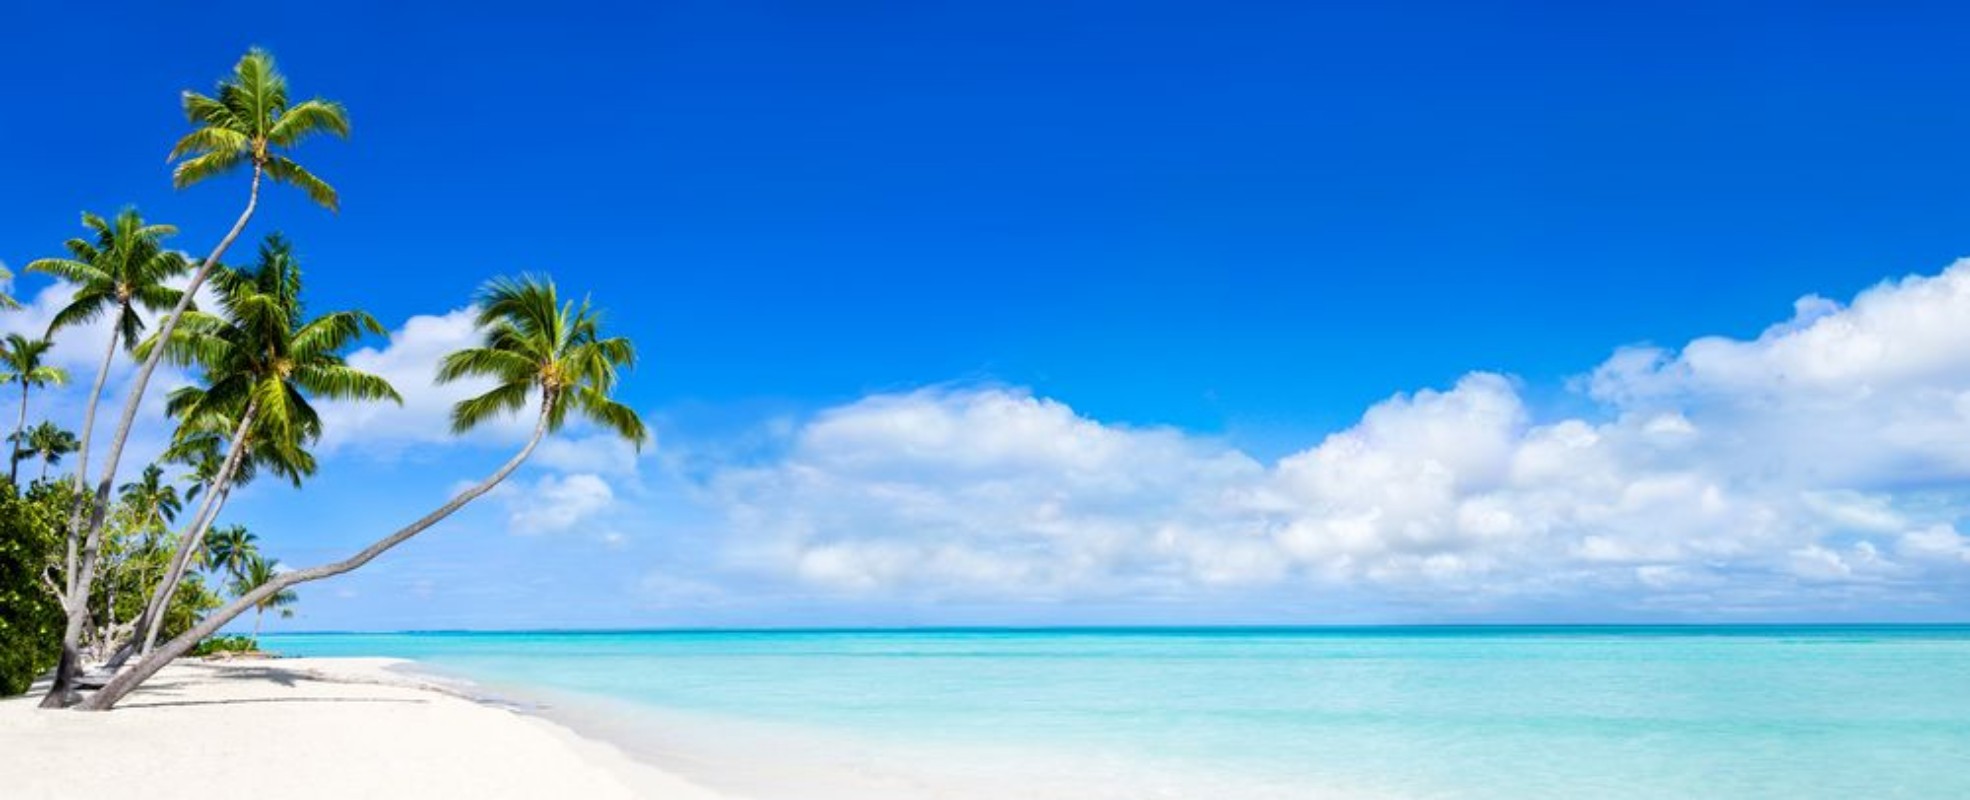 Image de Beach Panorama with blue water and palm trees